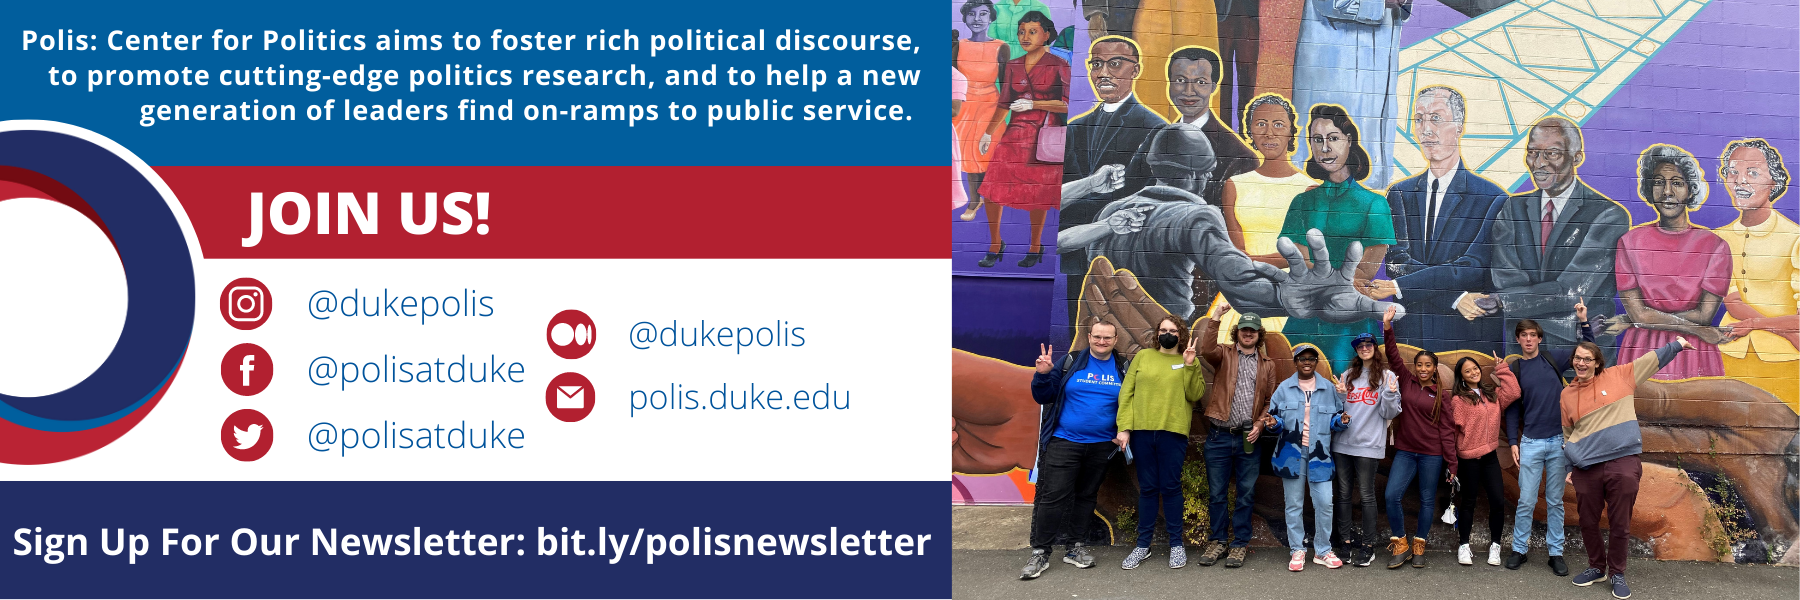 Join us at POLIS - sign up for our newsletter and follow us on social media